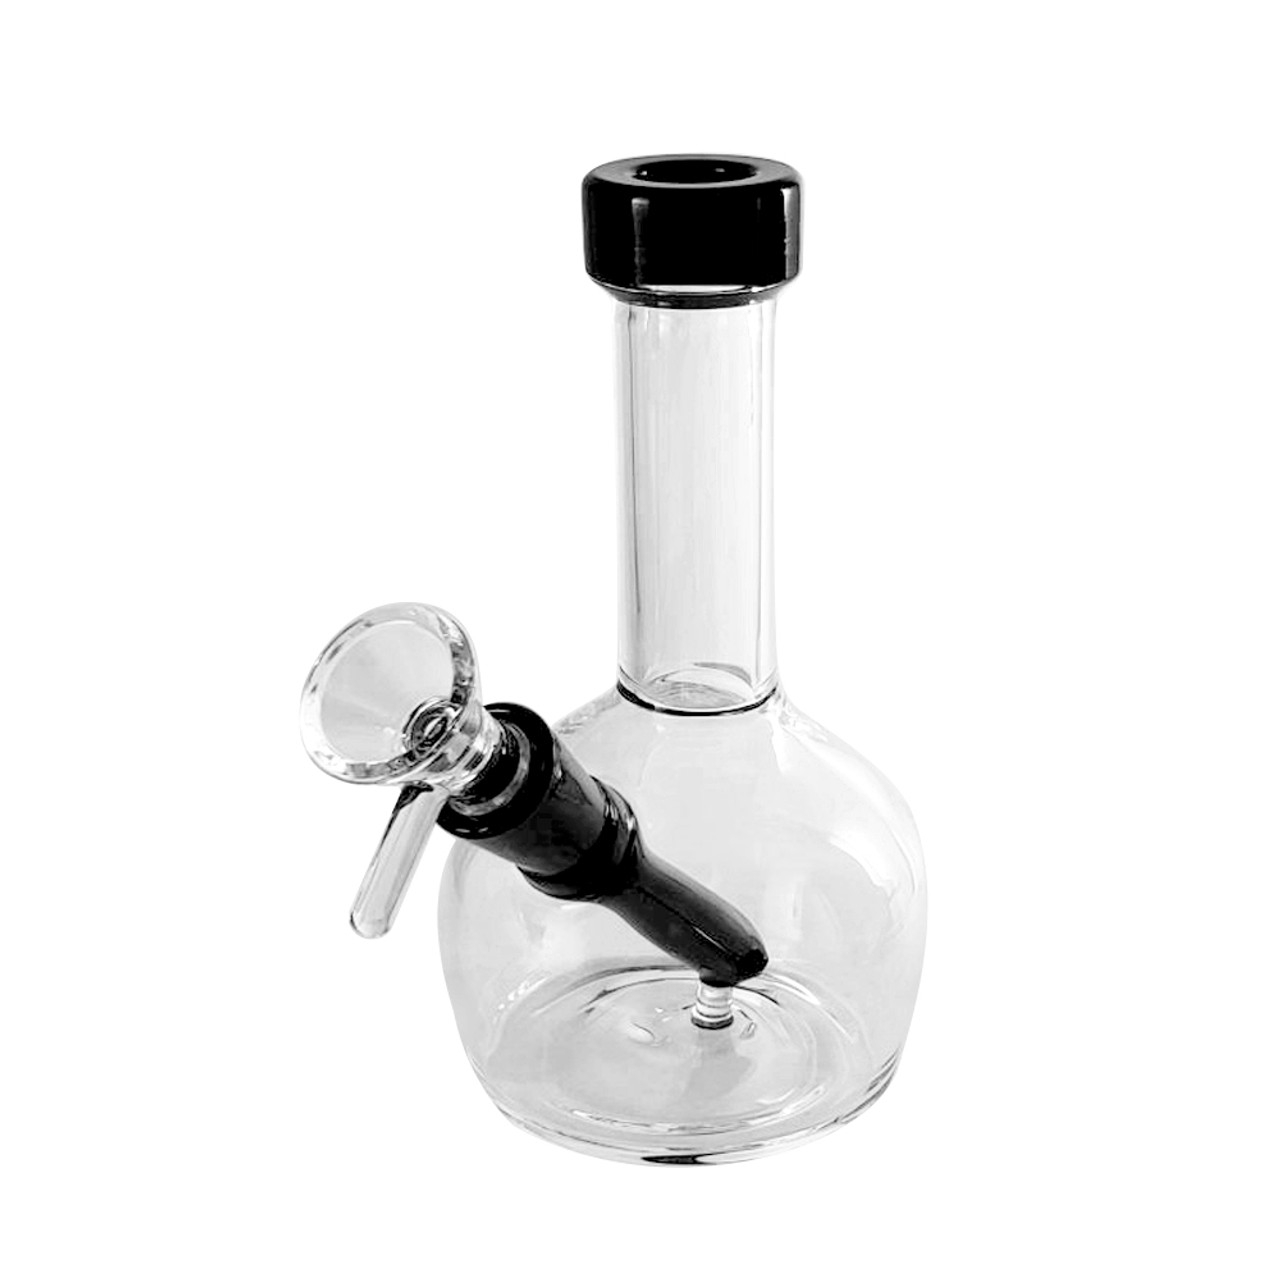 Bong Accessories, Parts for Bongs